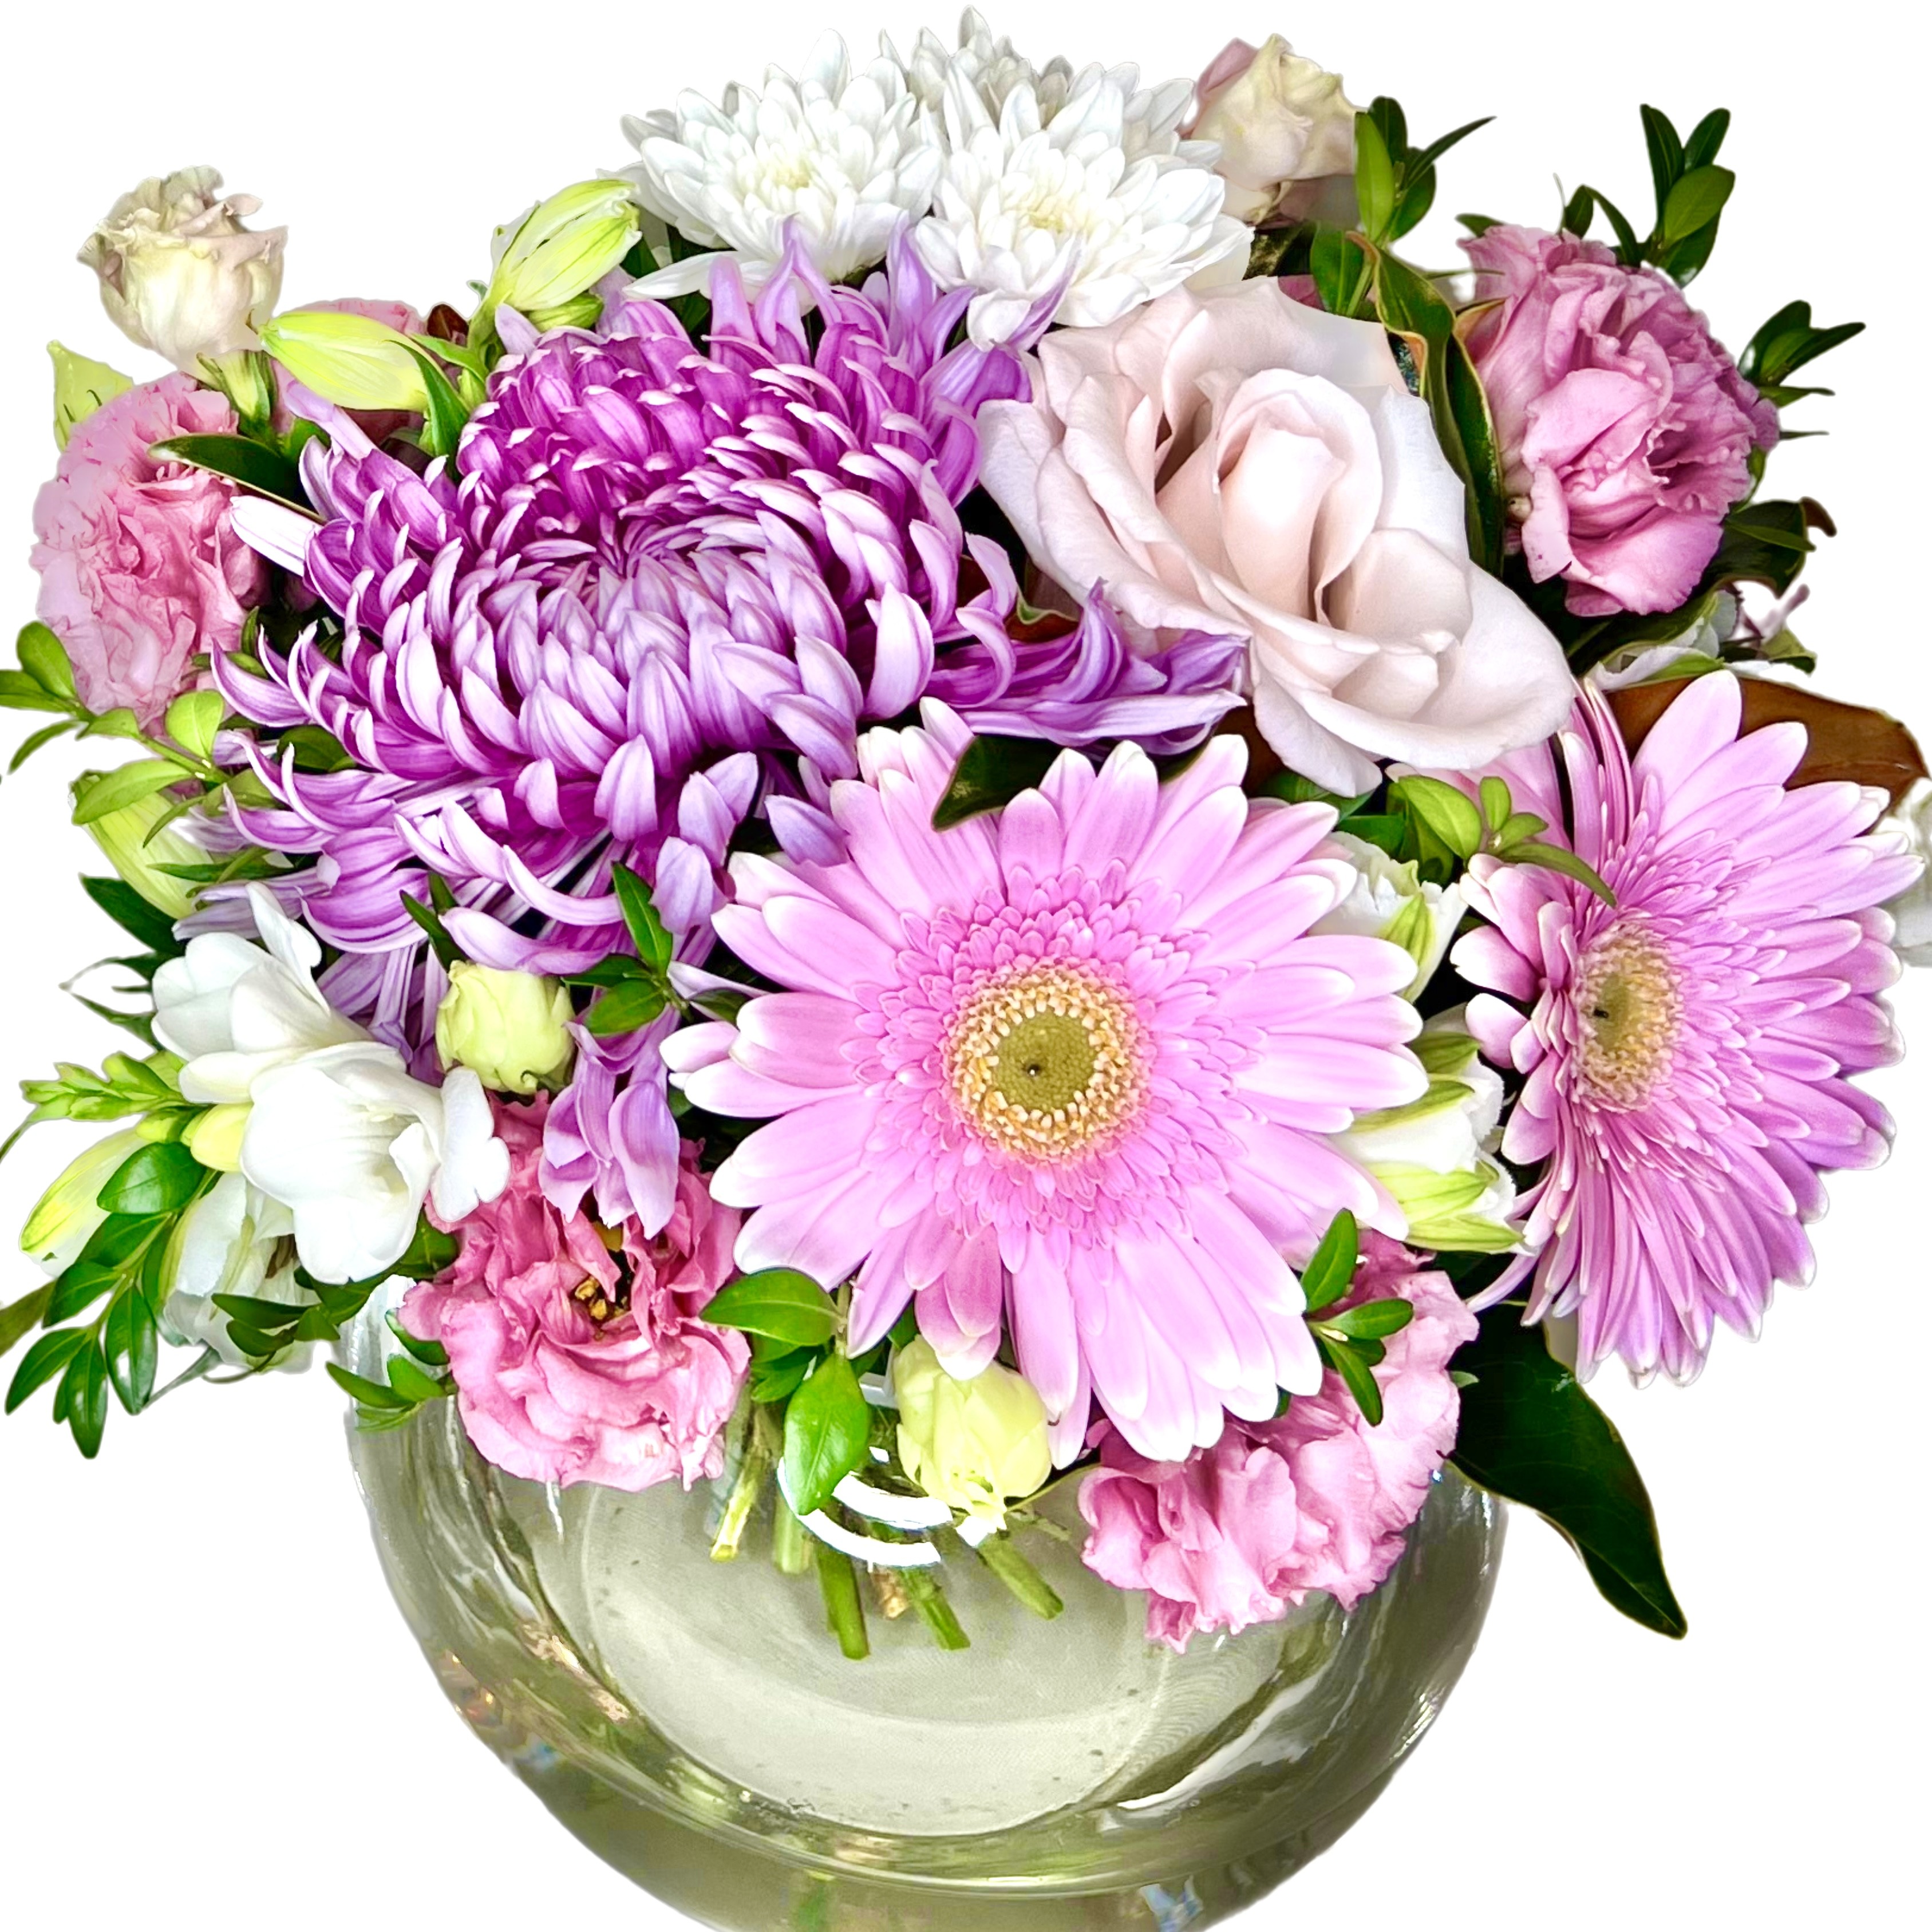 Mother's Vase of Flowers - Florist Choice